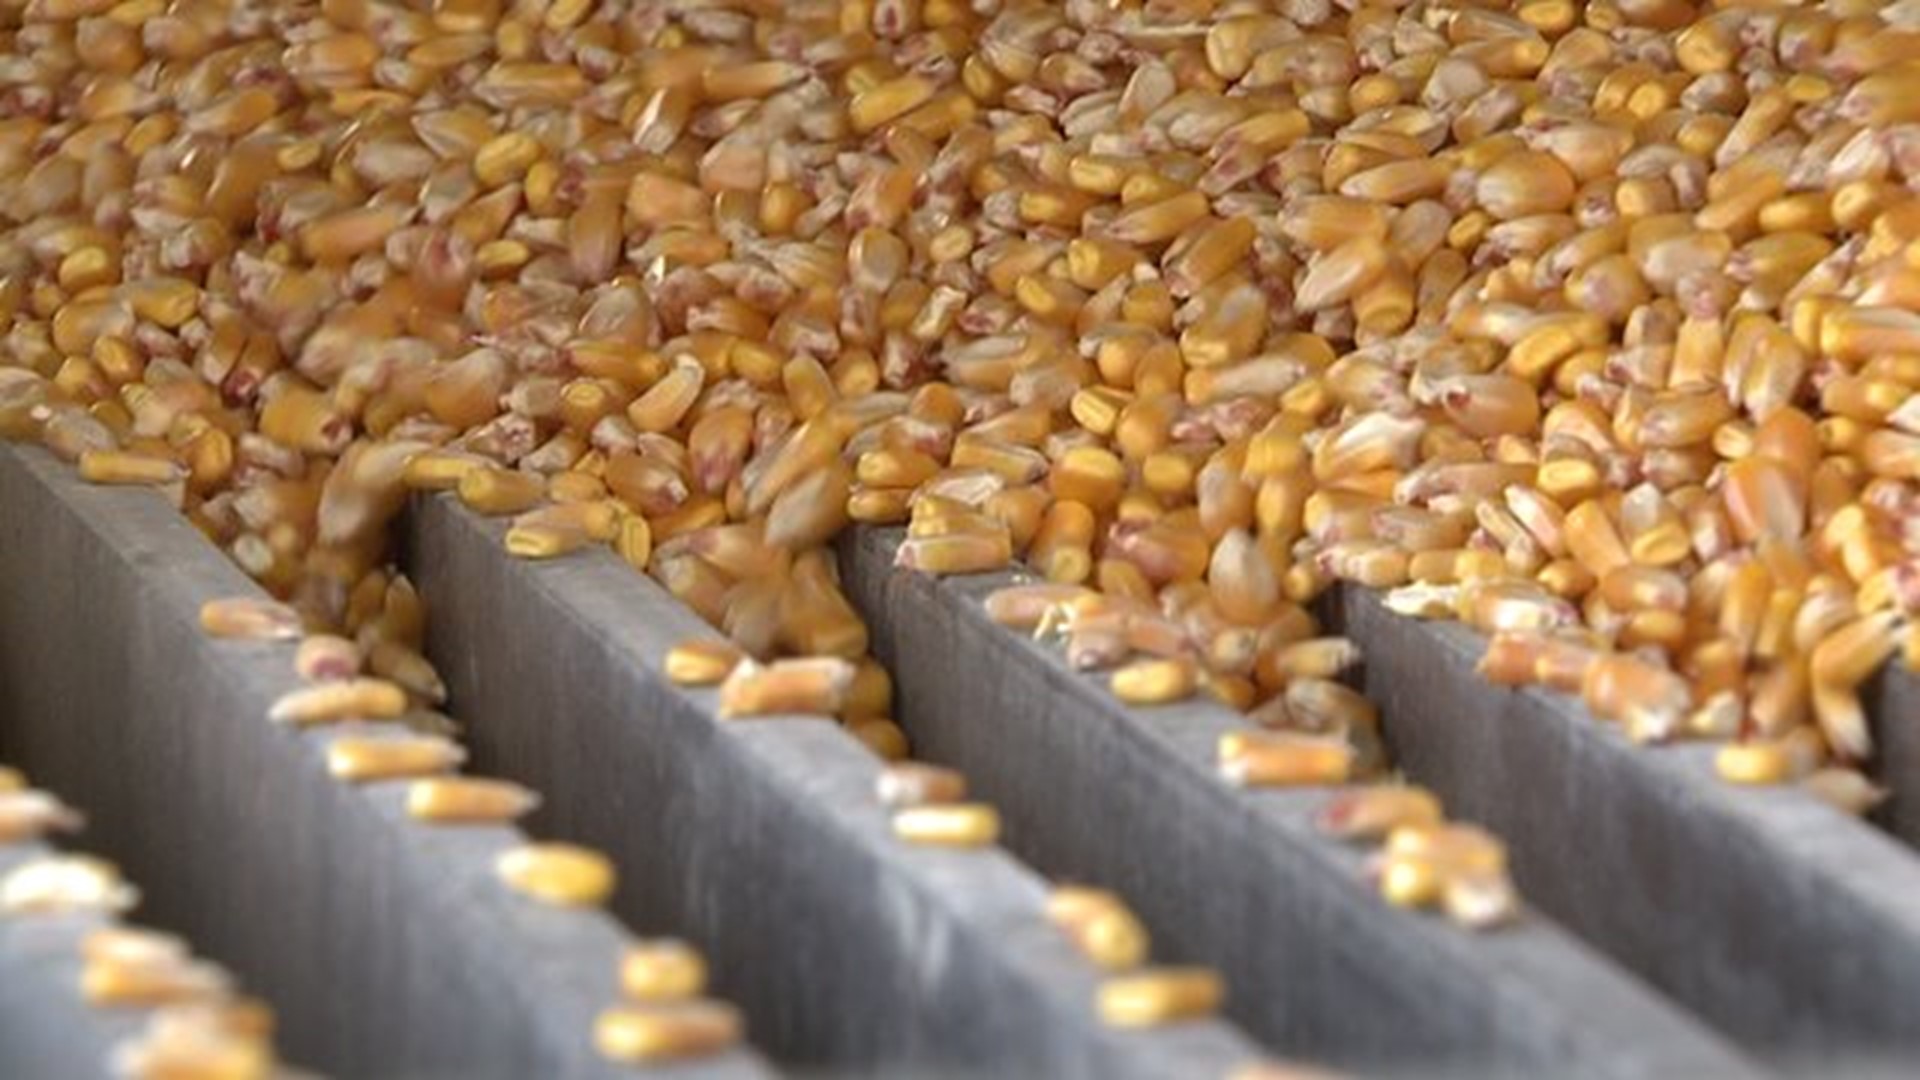 Iowa farmer worries about corn import war with Mexico